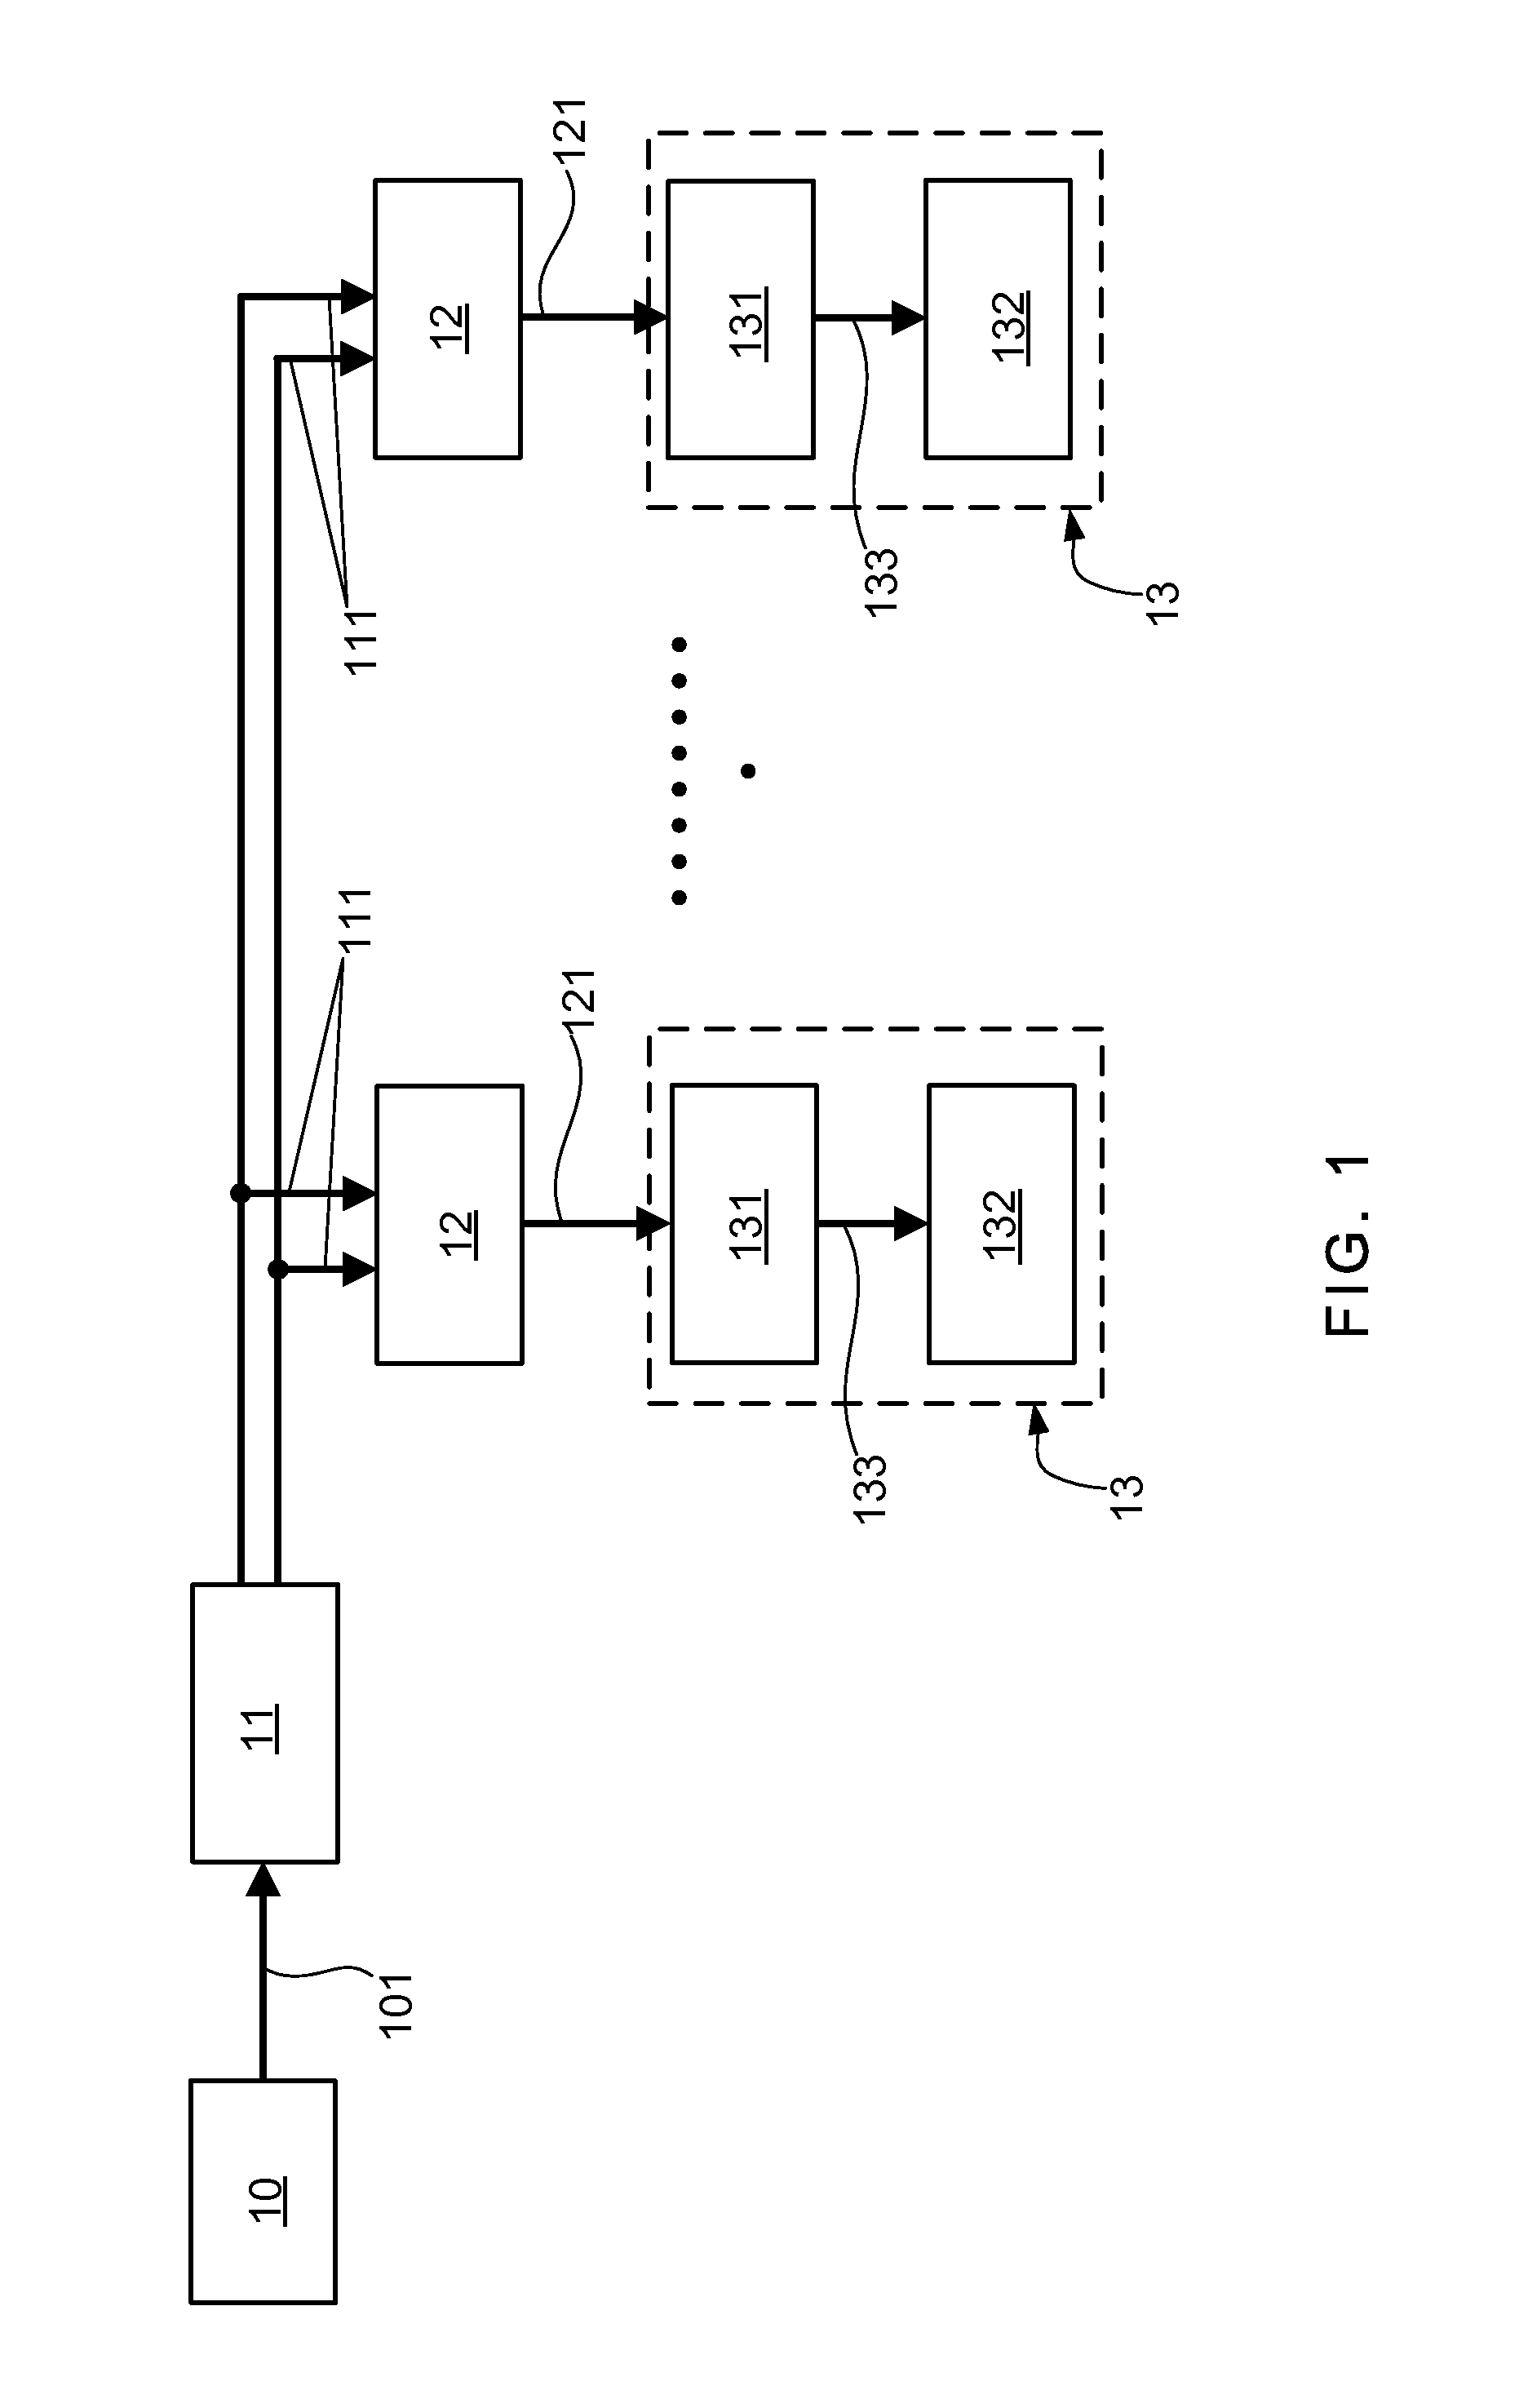 Synchronization signal transmitting device, method thereof and power electronic apparatus having the device